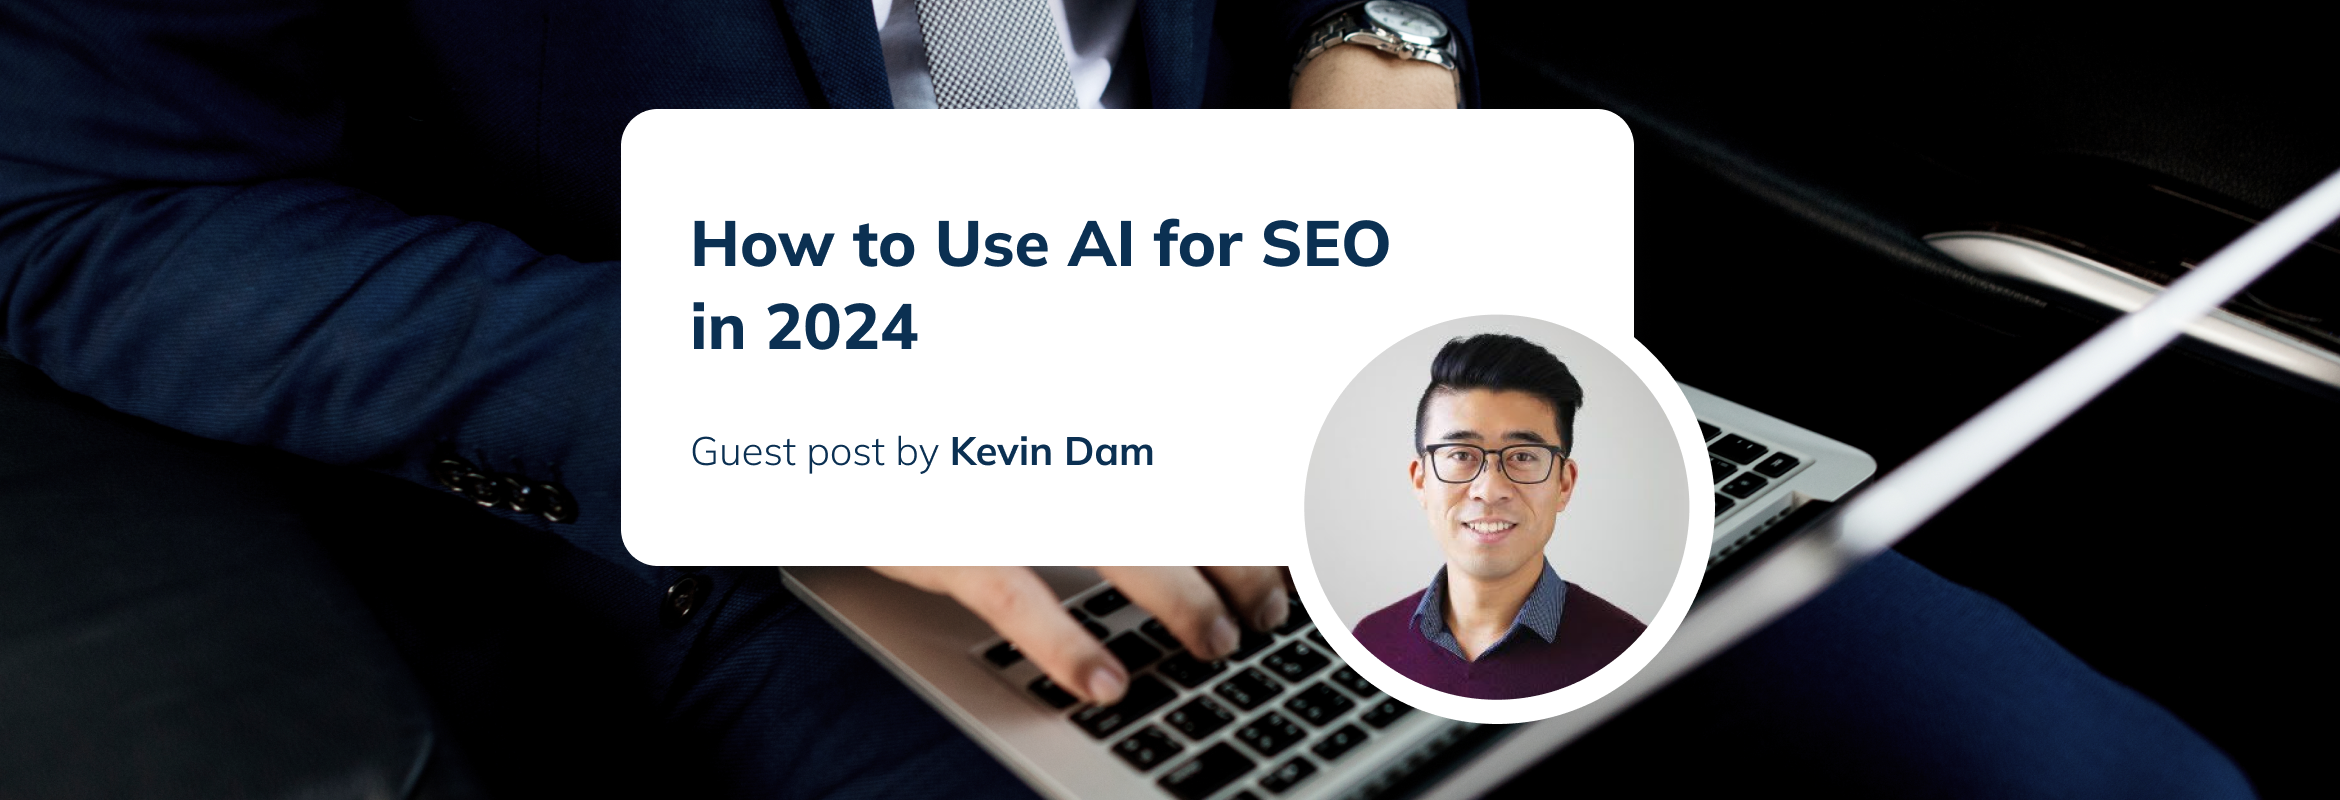 How to Use AI for SEO in 2024